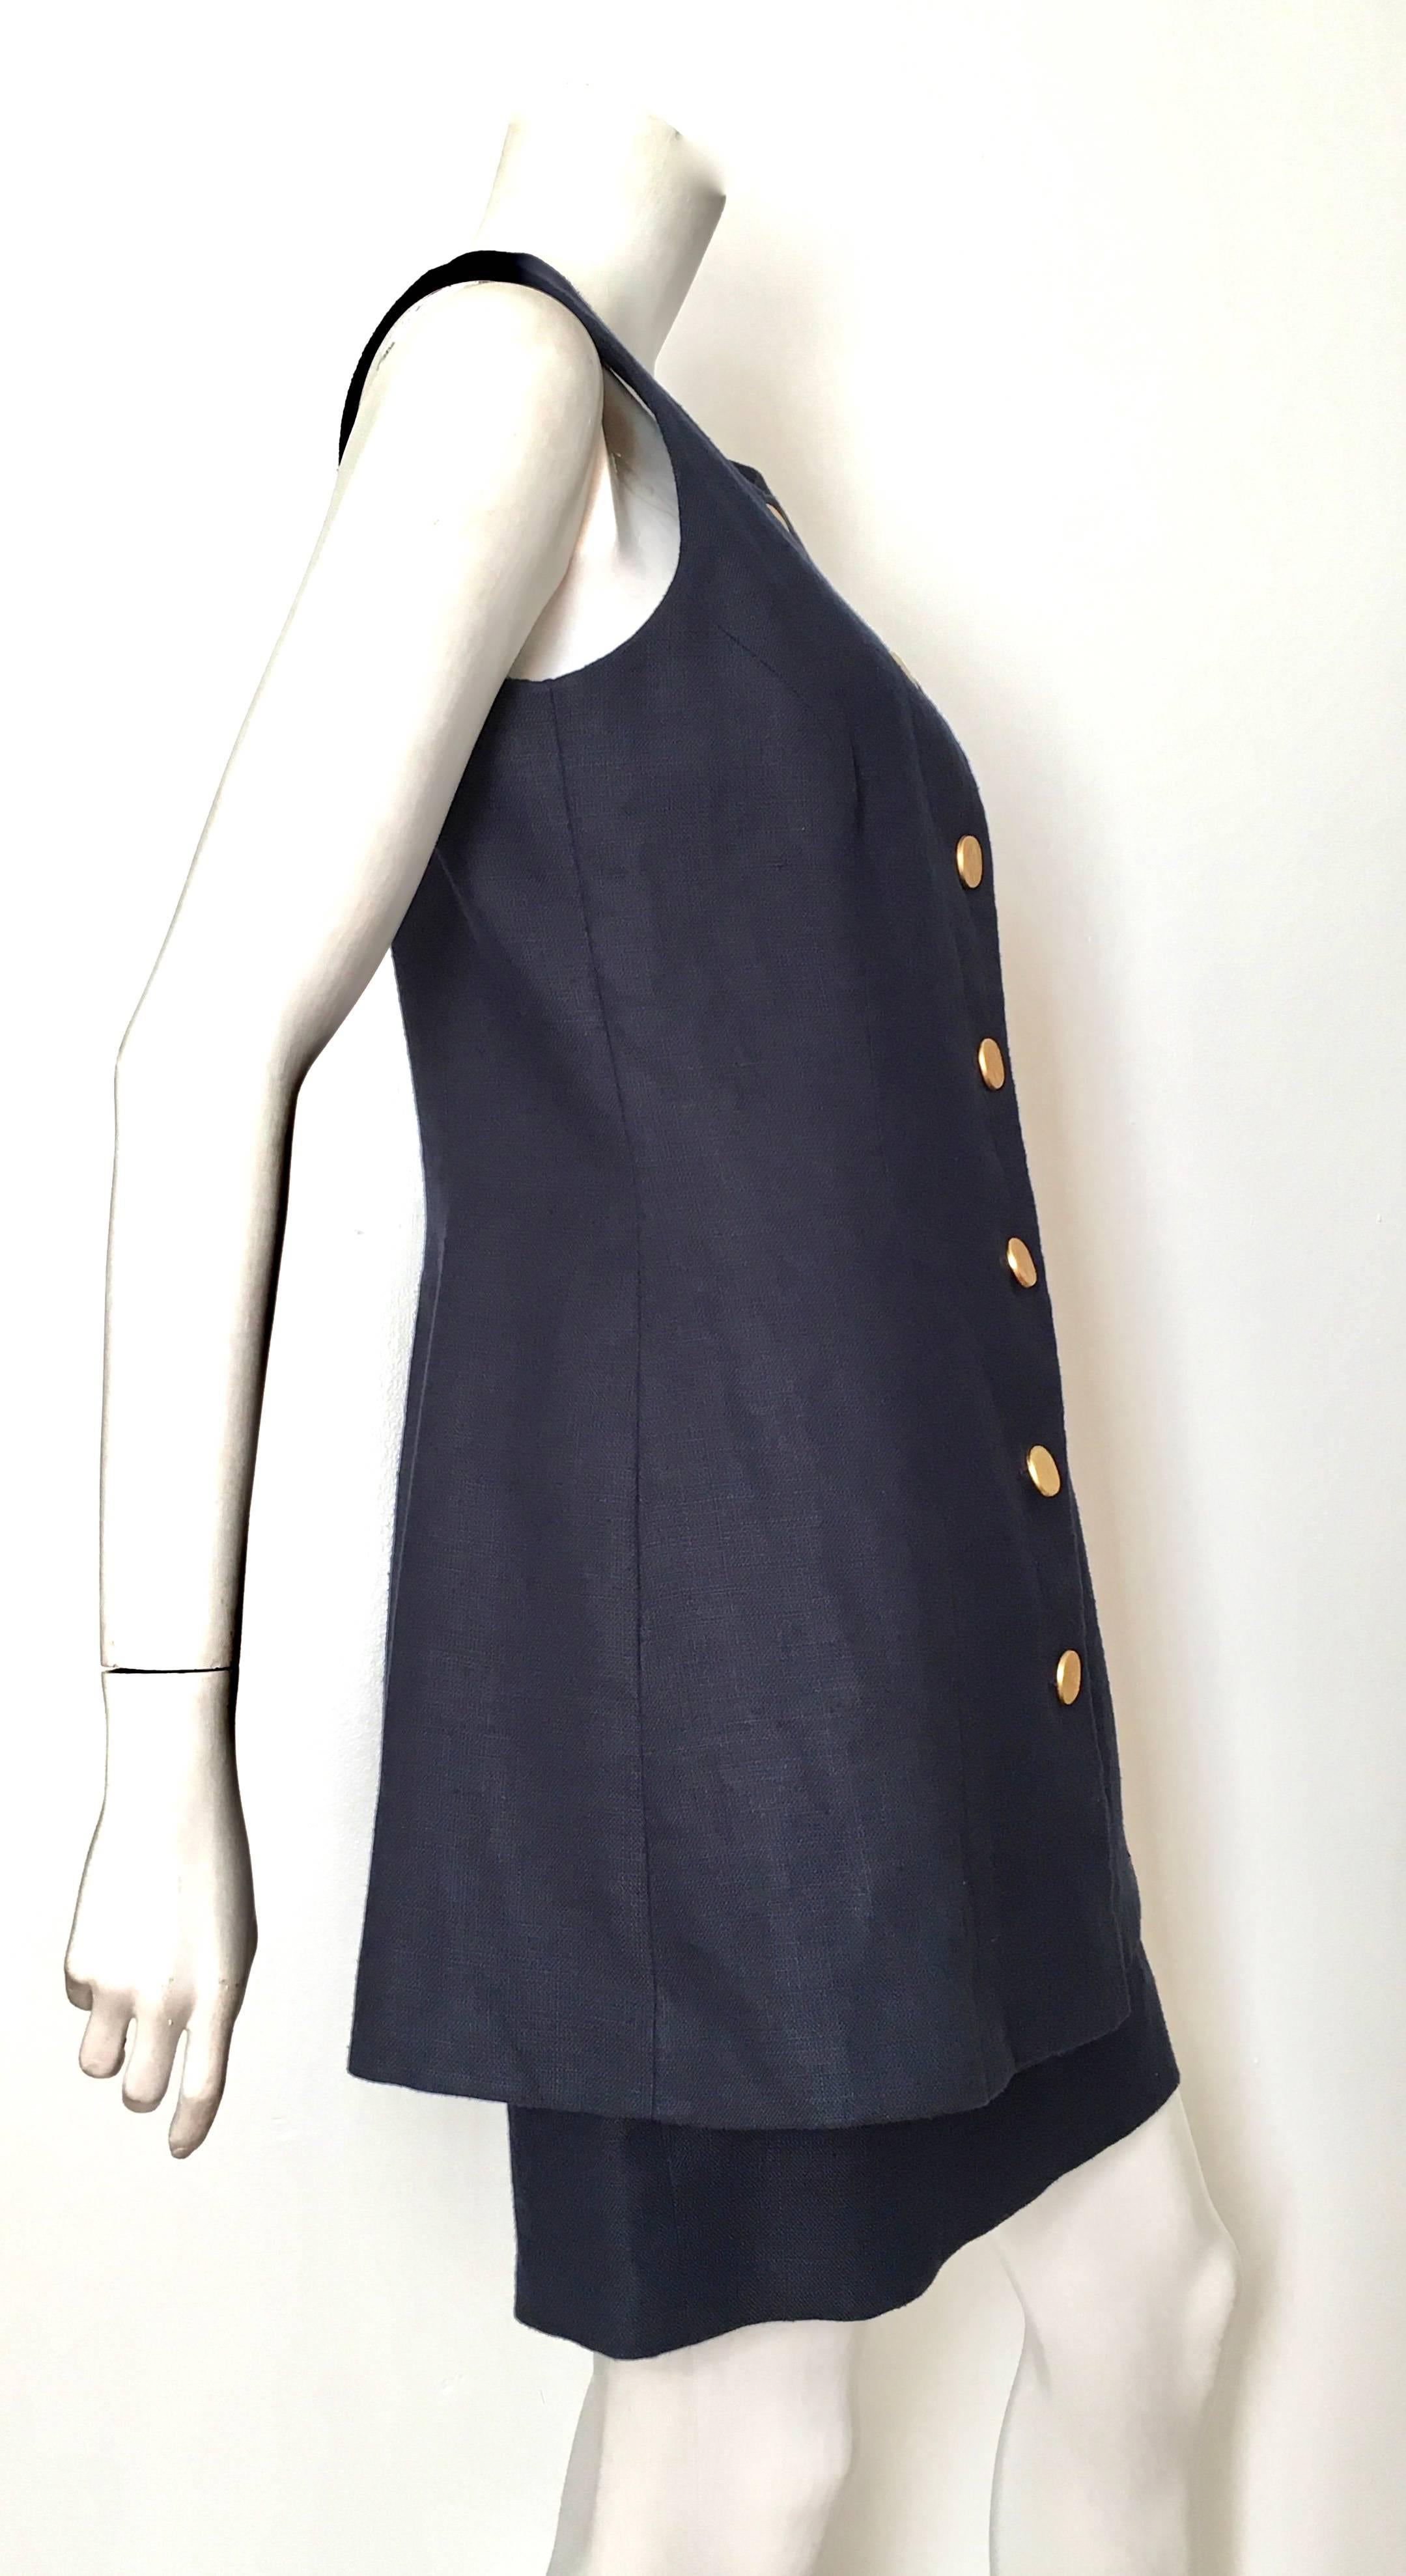 Arnold Scaasi 1980s 2 piece navy linen sleeveless jacket & skirt set is labeled a size 10 but fits more like a modern USA size 8.  Please grab your tape measure so you can measure your bust, waist & hips to make certain this vintage treasure will